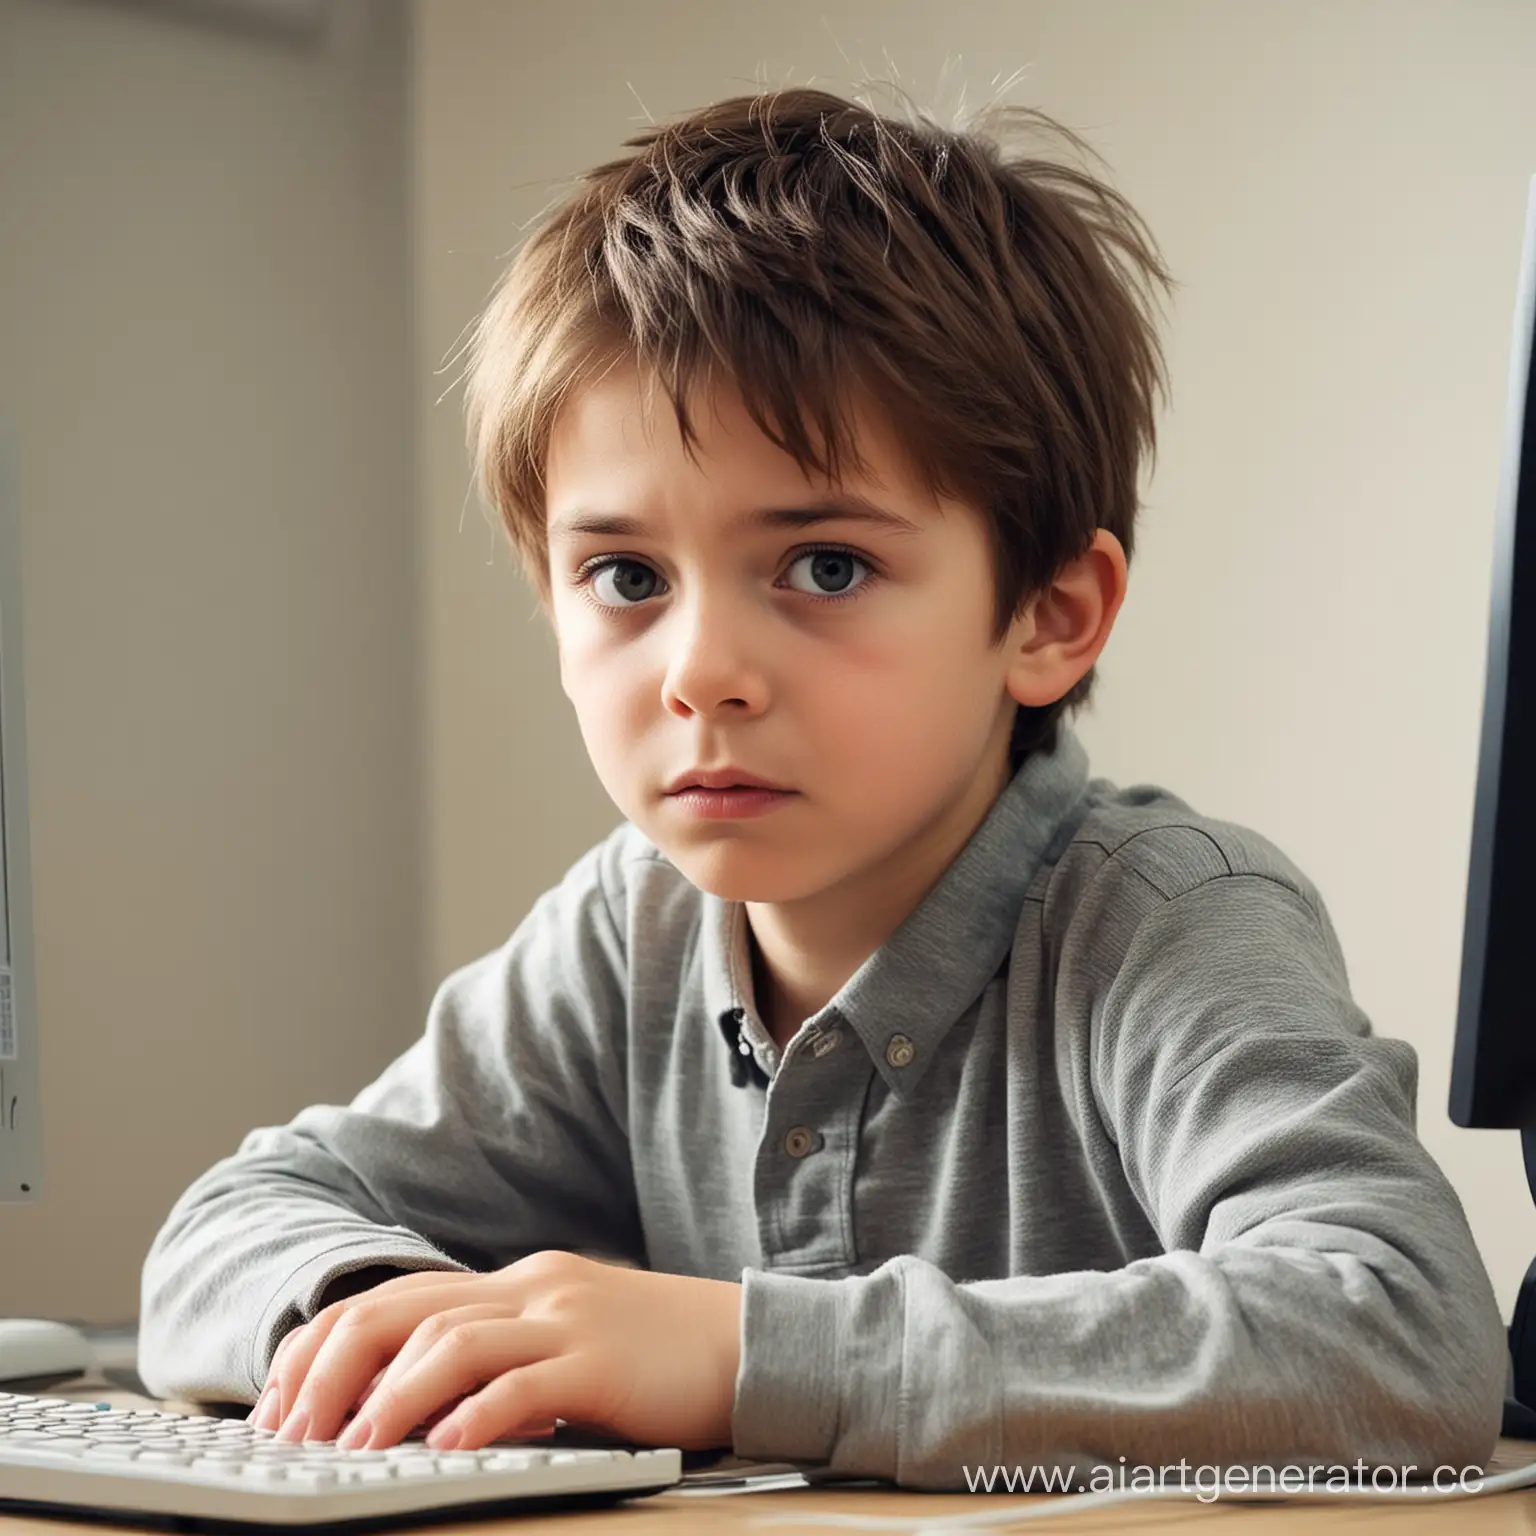 Curious-Child-Exploring-Technology-at-Computer